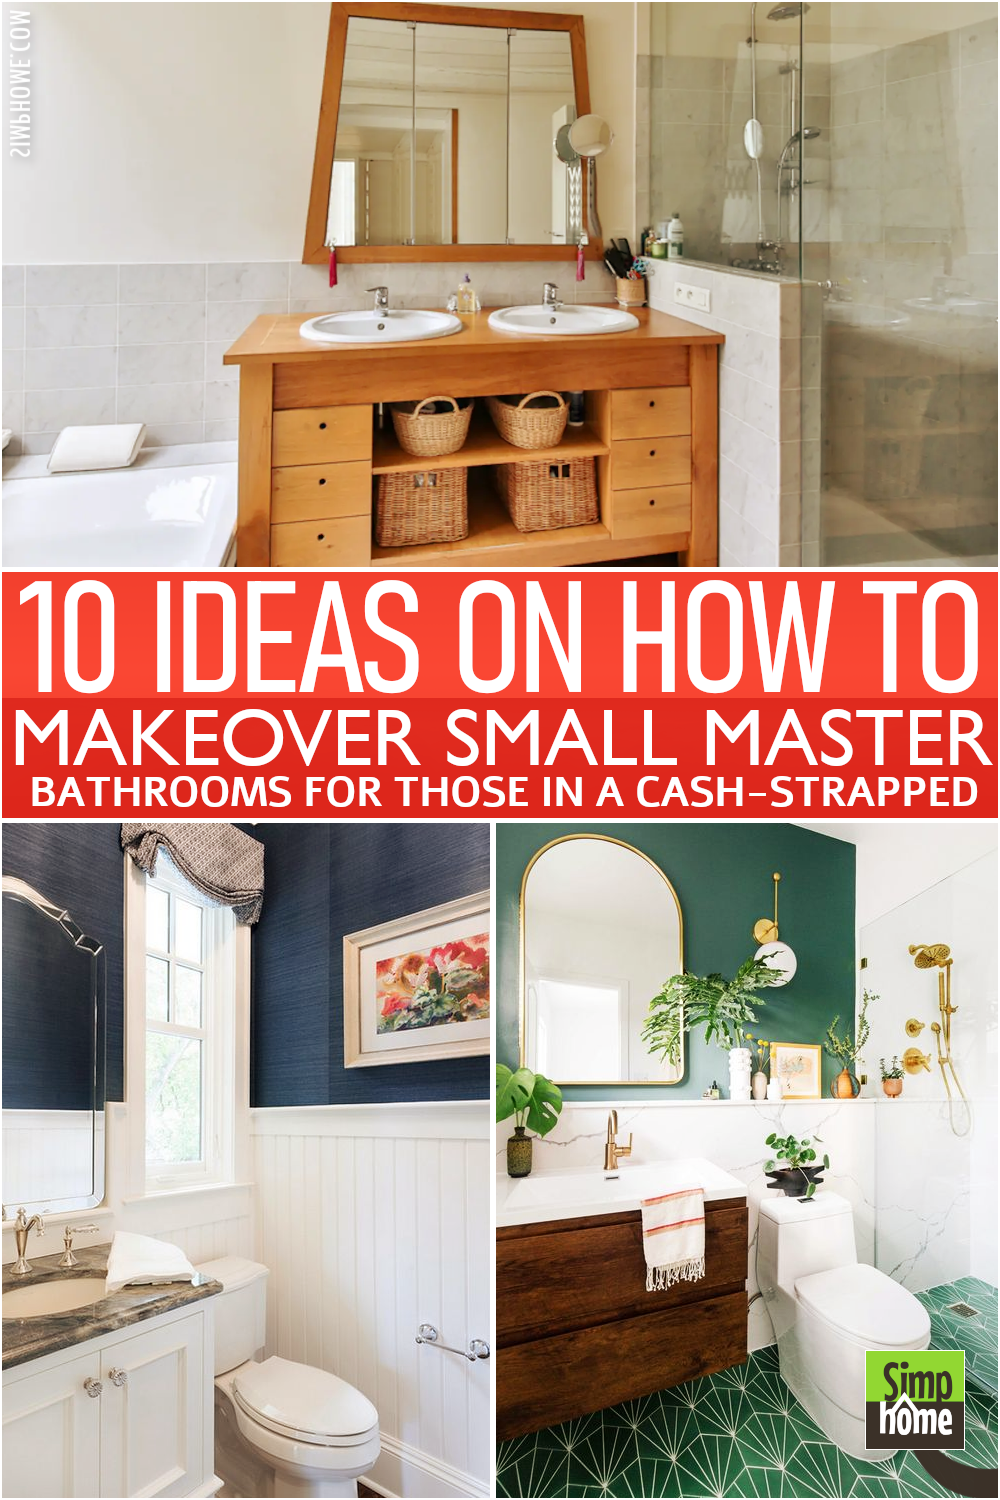 10 Small Master Bathroom Makeover Poster